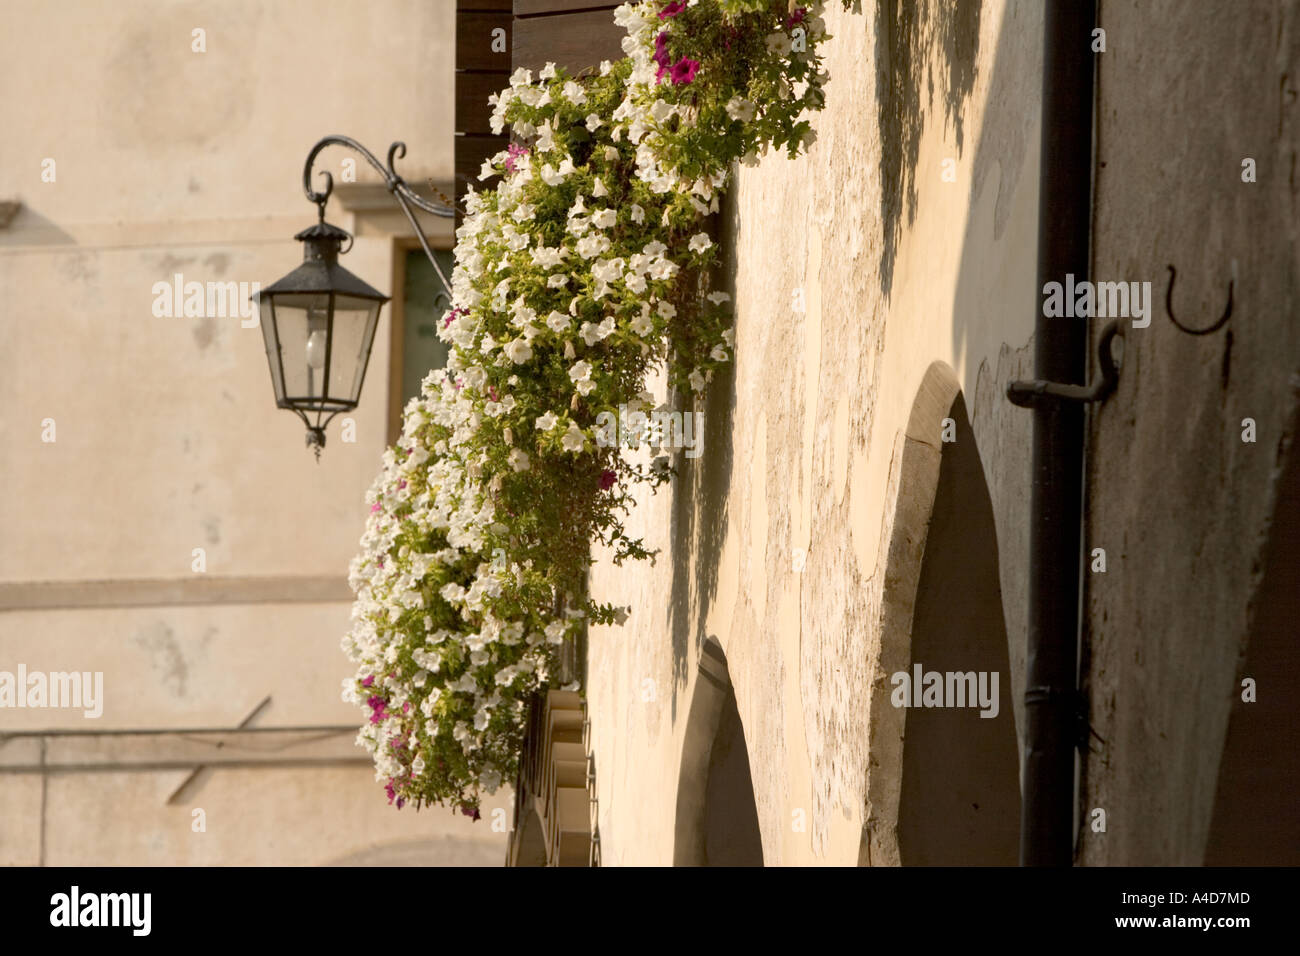 Street lamp and hanging flowers in the main square of Asolo, Veneto, Italy Stock Photo